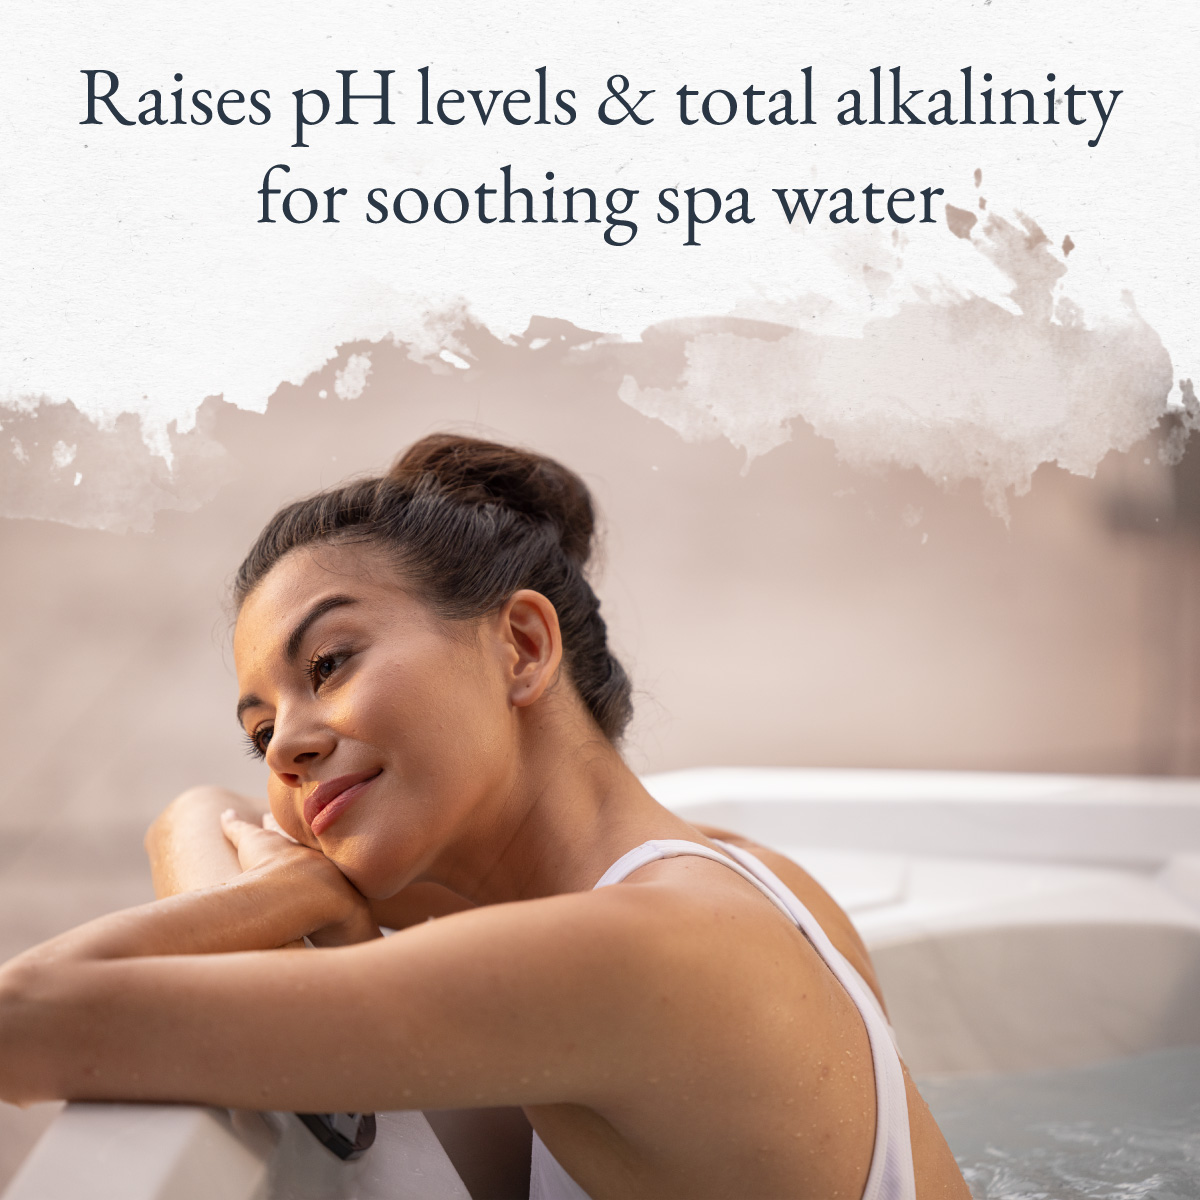 Raises pH levels & total alkalinity for soothing spa water